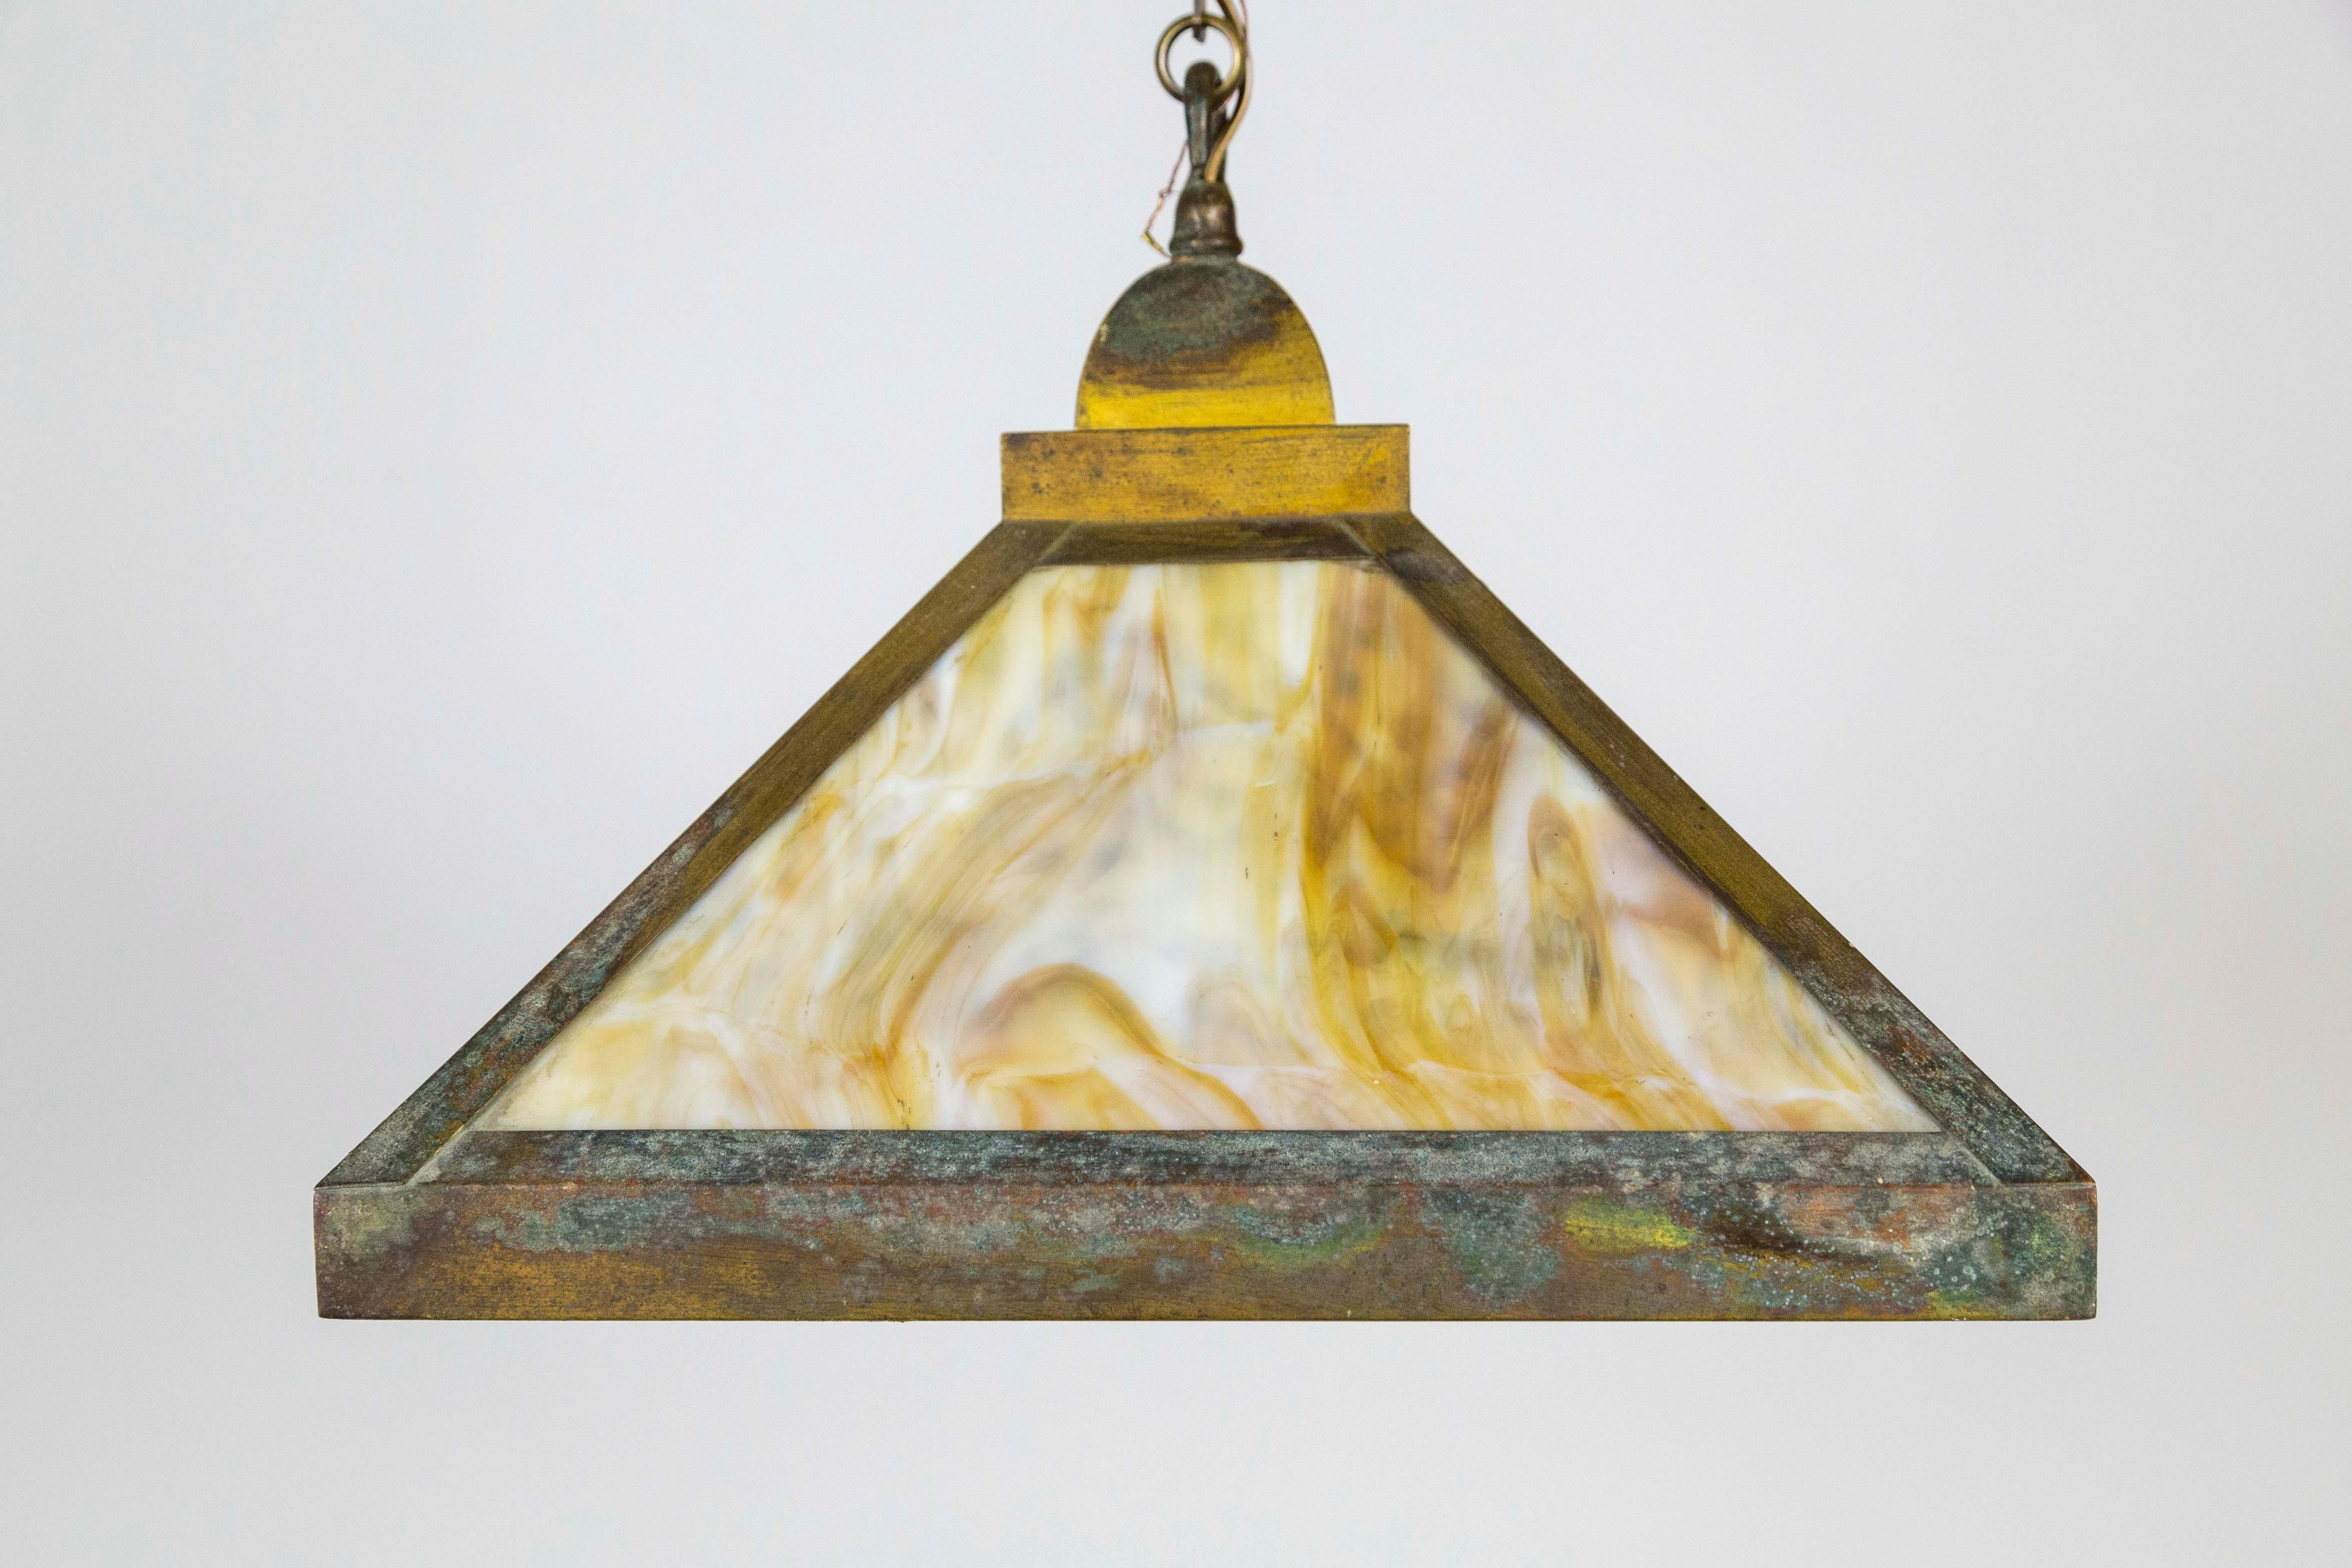 An original, early 20th century, Arts & Crafts pendant light composed of amber and white swirl stained glass panels in a 4-sided pyramid shape; the brass structure has a gorgeous patina and unique chain. 3 lights, newly wired. Measures: 16